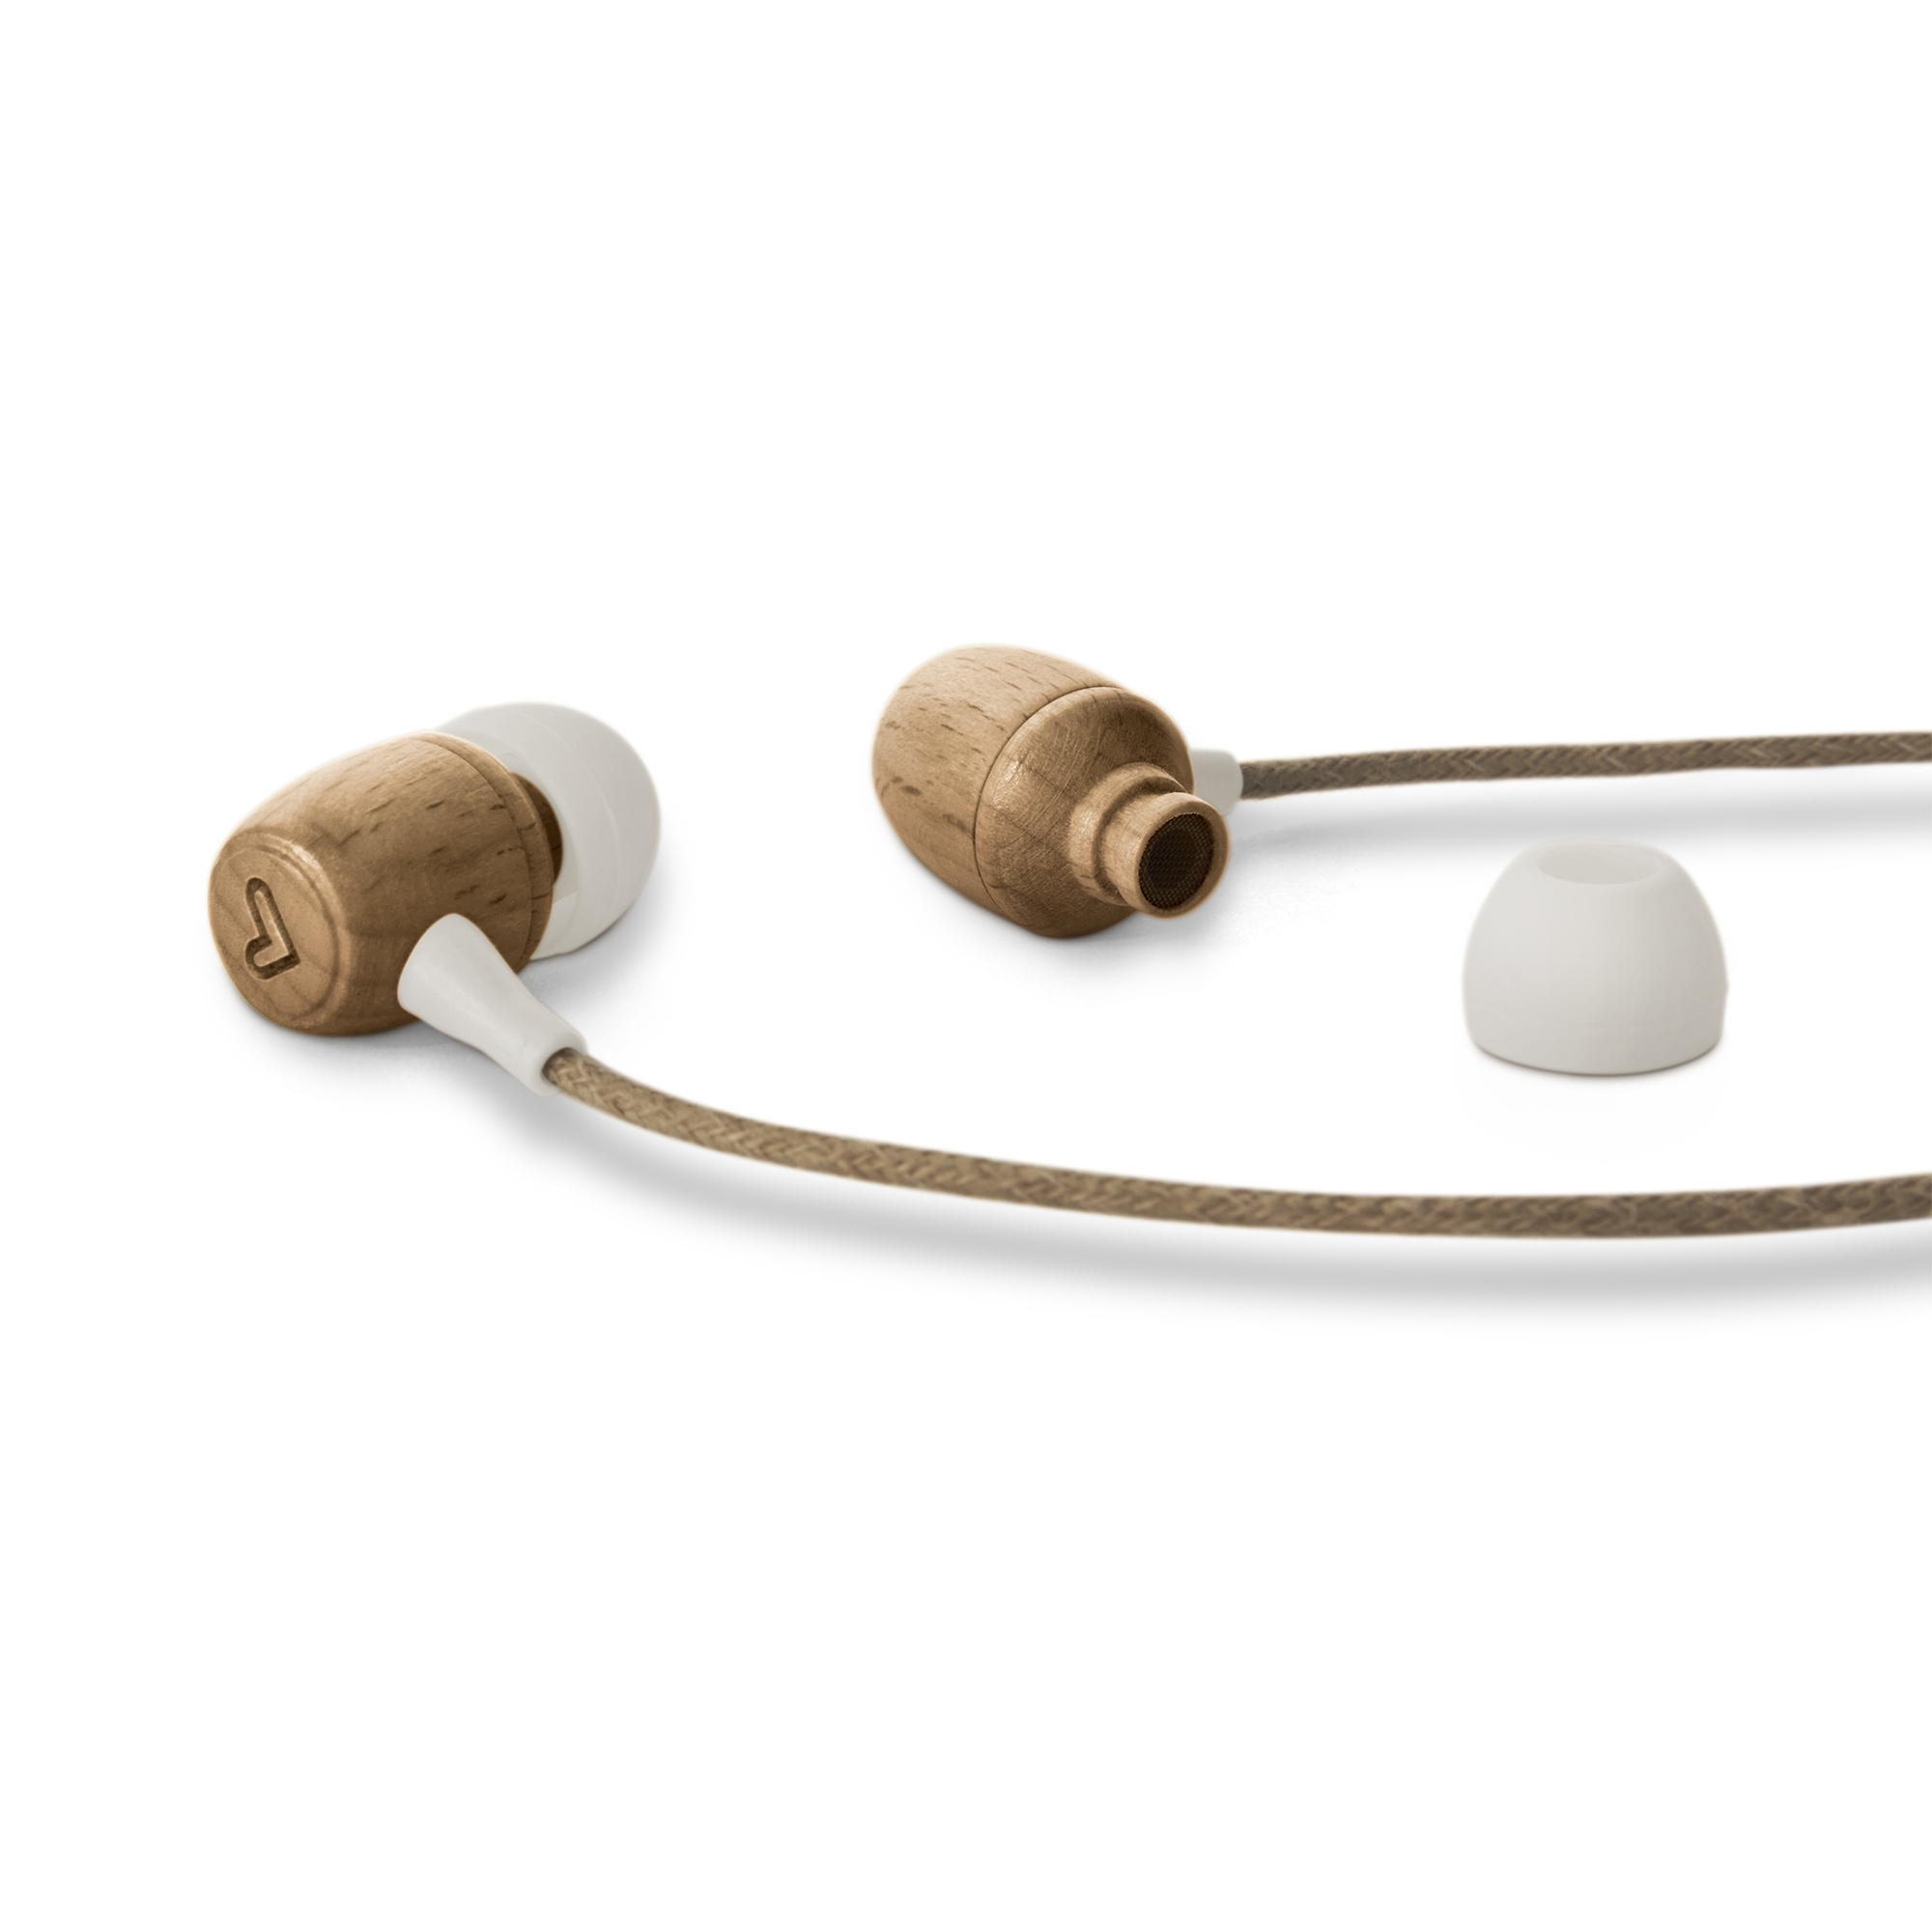 In-ear headphones made from eco-friendly materials